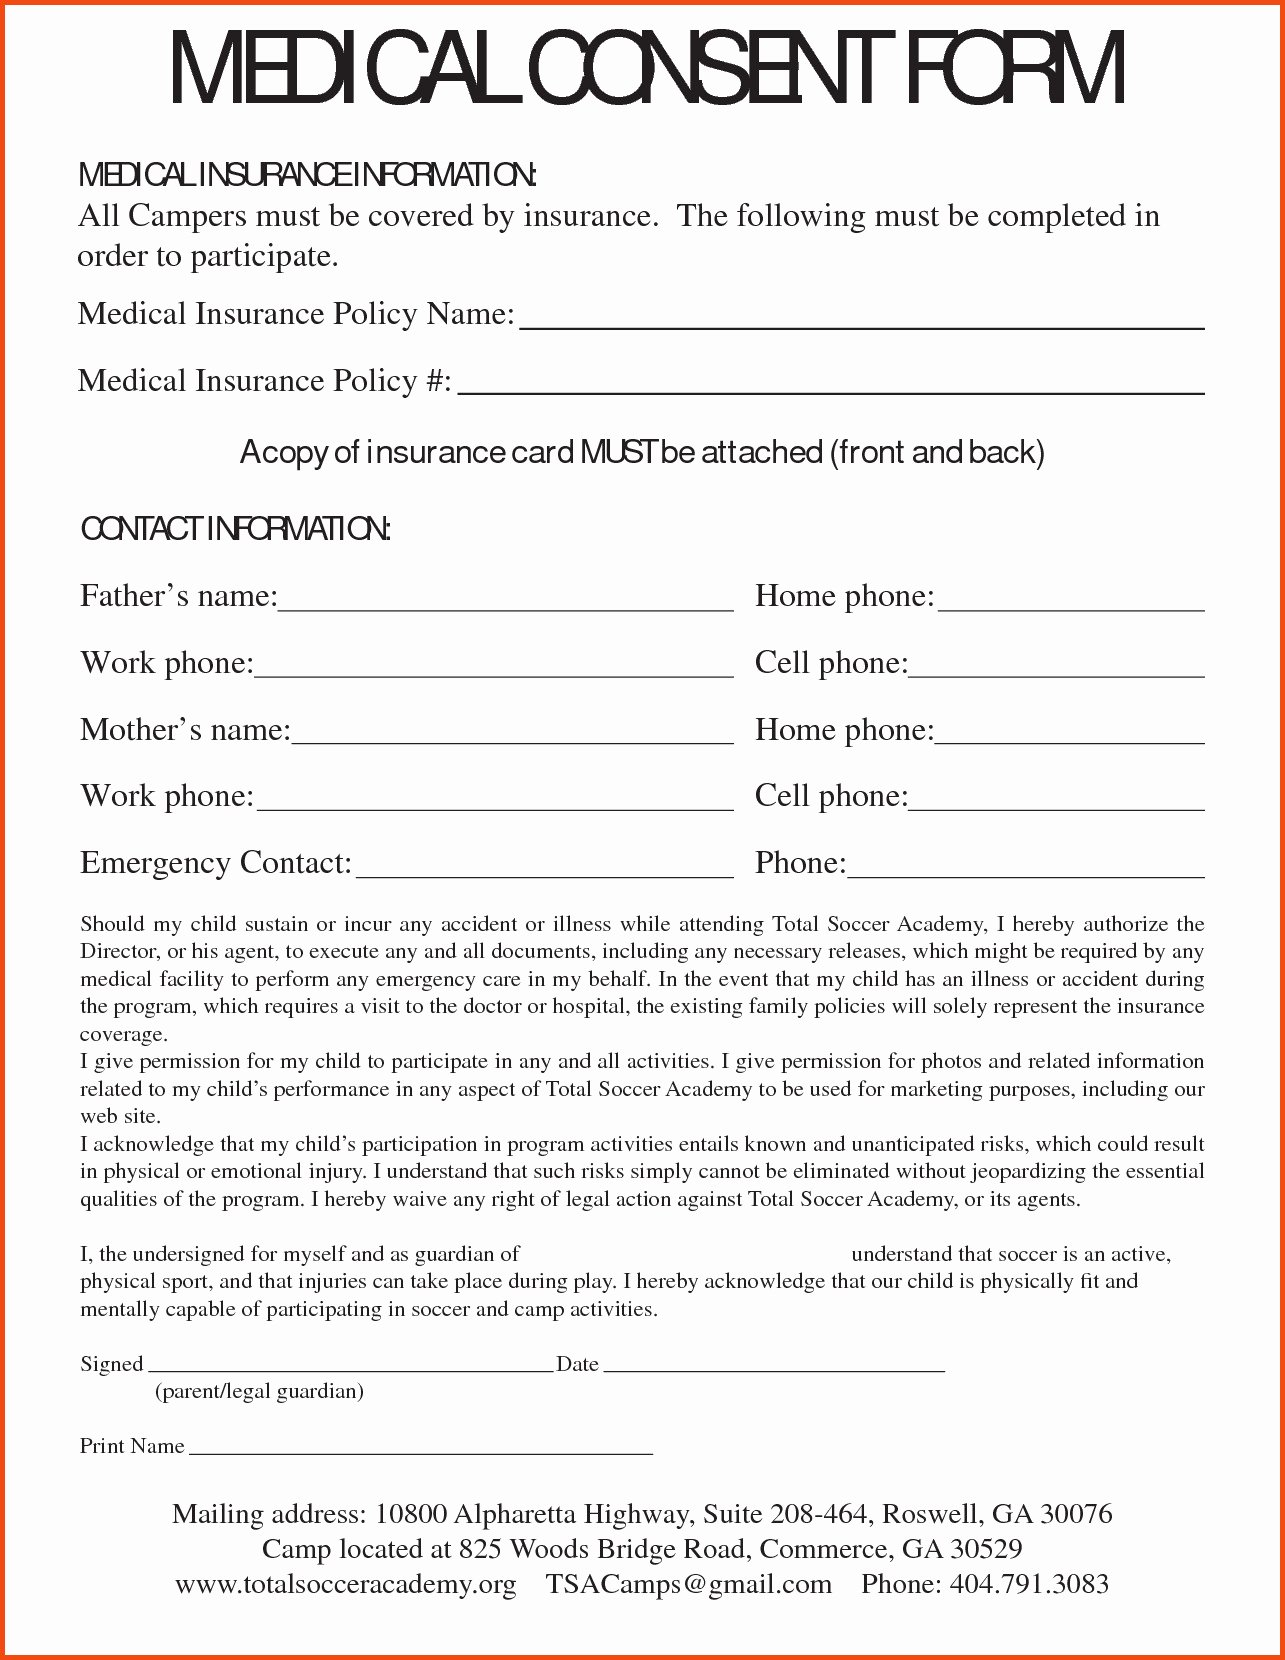 Medical Consent form Templates Lovely Medical Consent Letter Template Collection